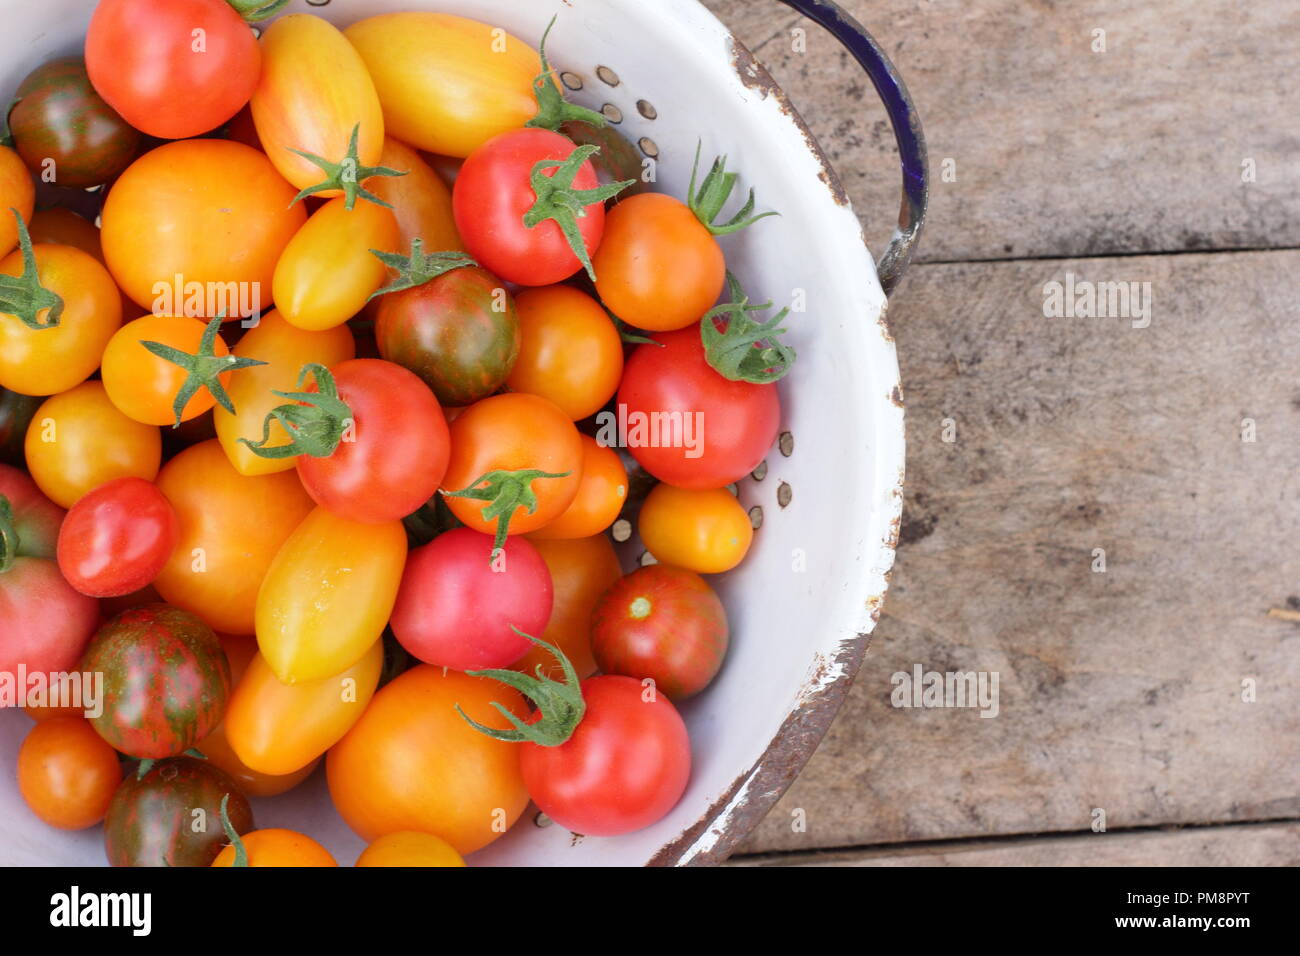 Tomatoes in colander top view. Freshly picked homegrown tomatoes - Chadwick's Cherry and Black Zebra in enamel colander,UK Stock Photo